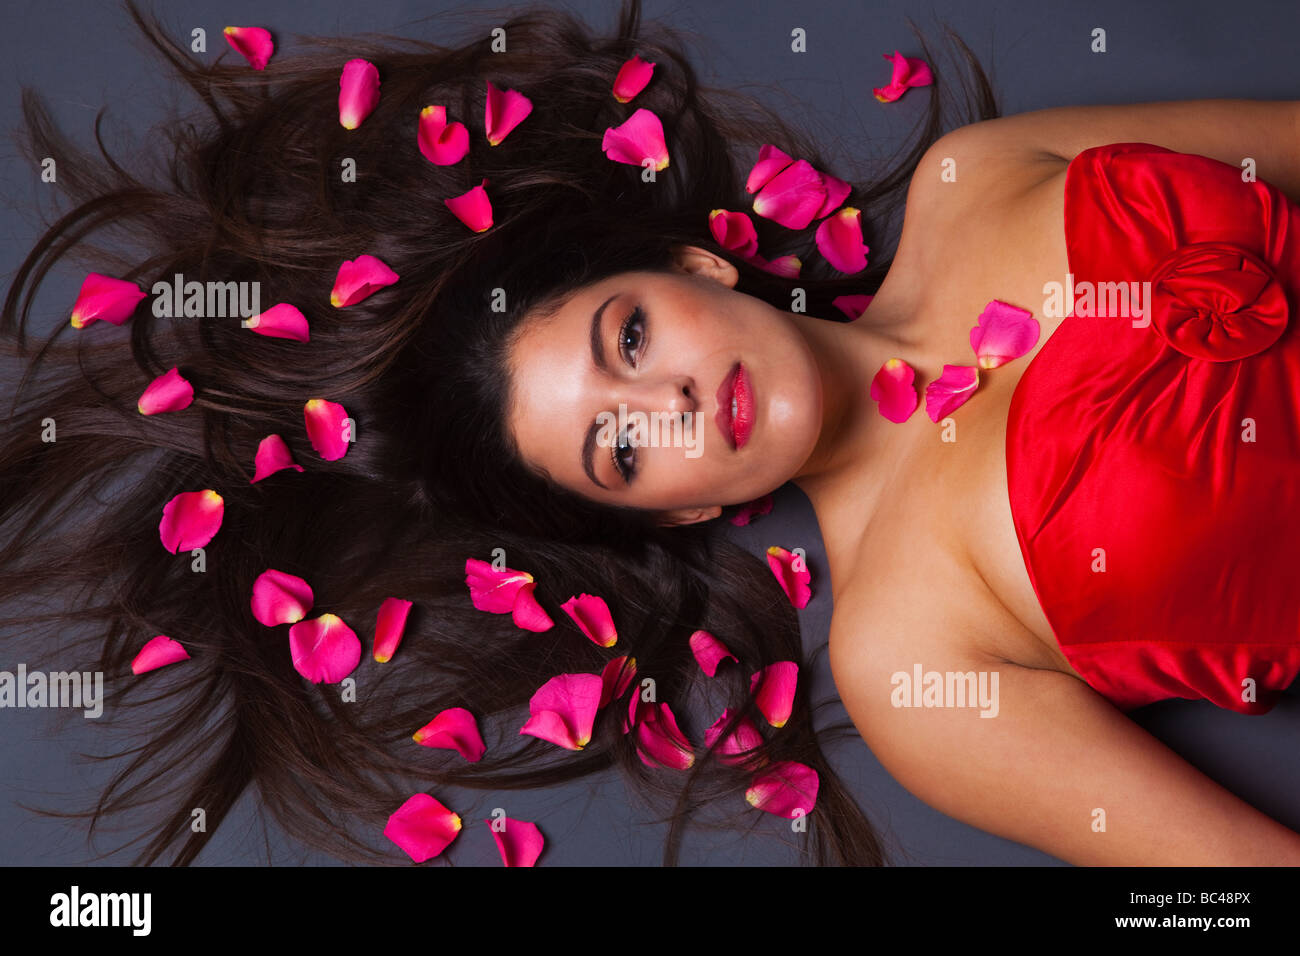 Beautiful brunette woman in a red dress lying down with pink rose petals in her hair Stock Photo